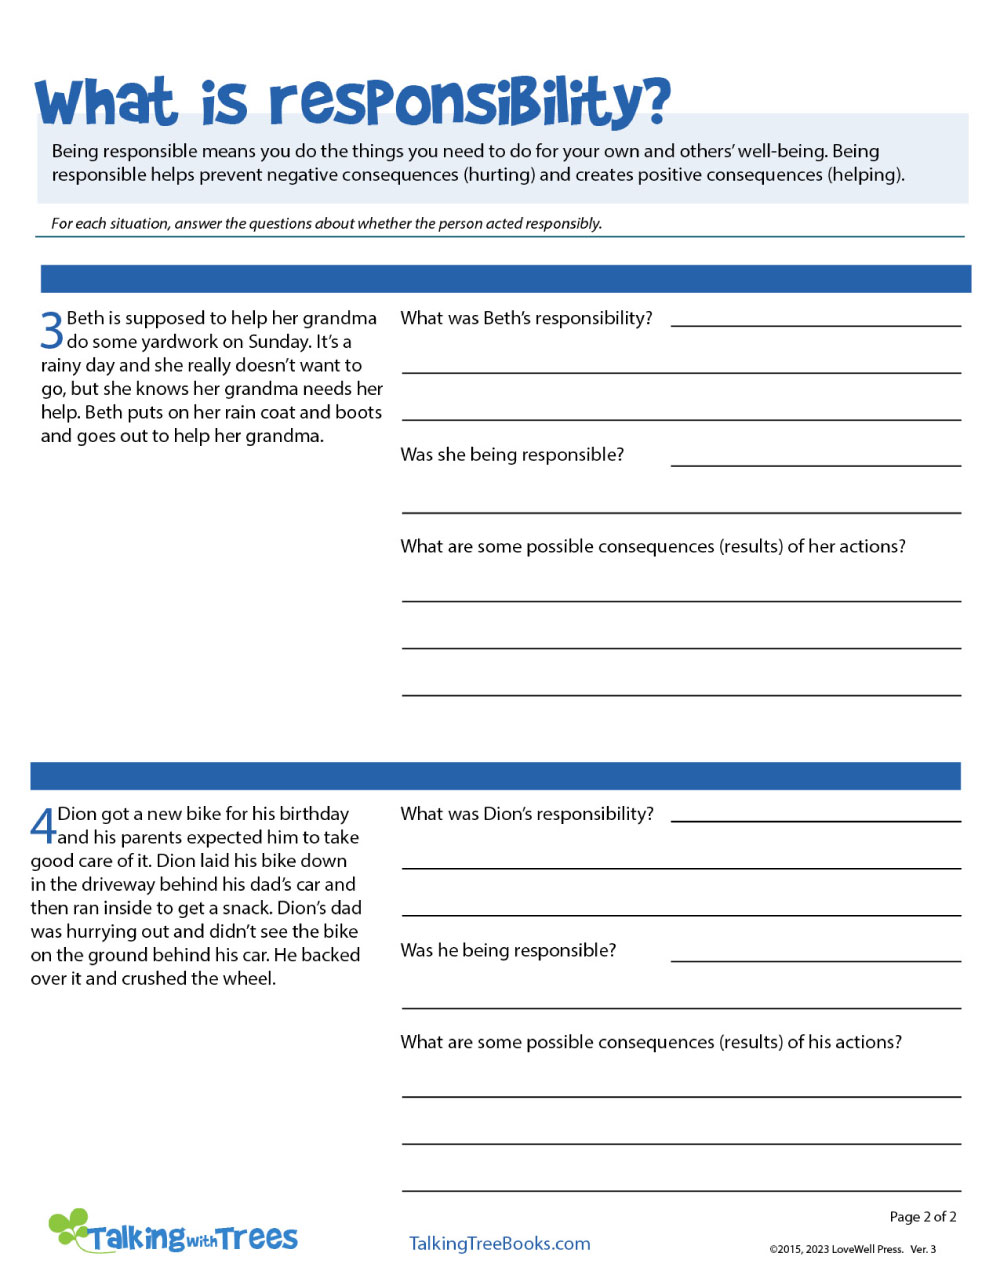 Responsibility Worksheet on 'What is responsibility?'